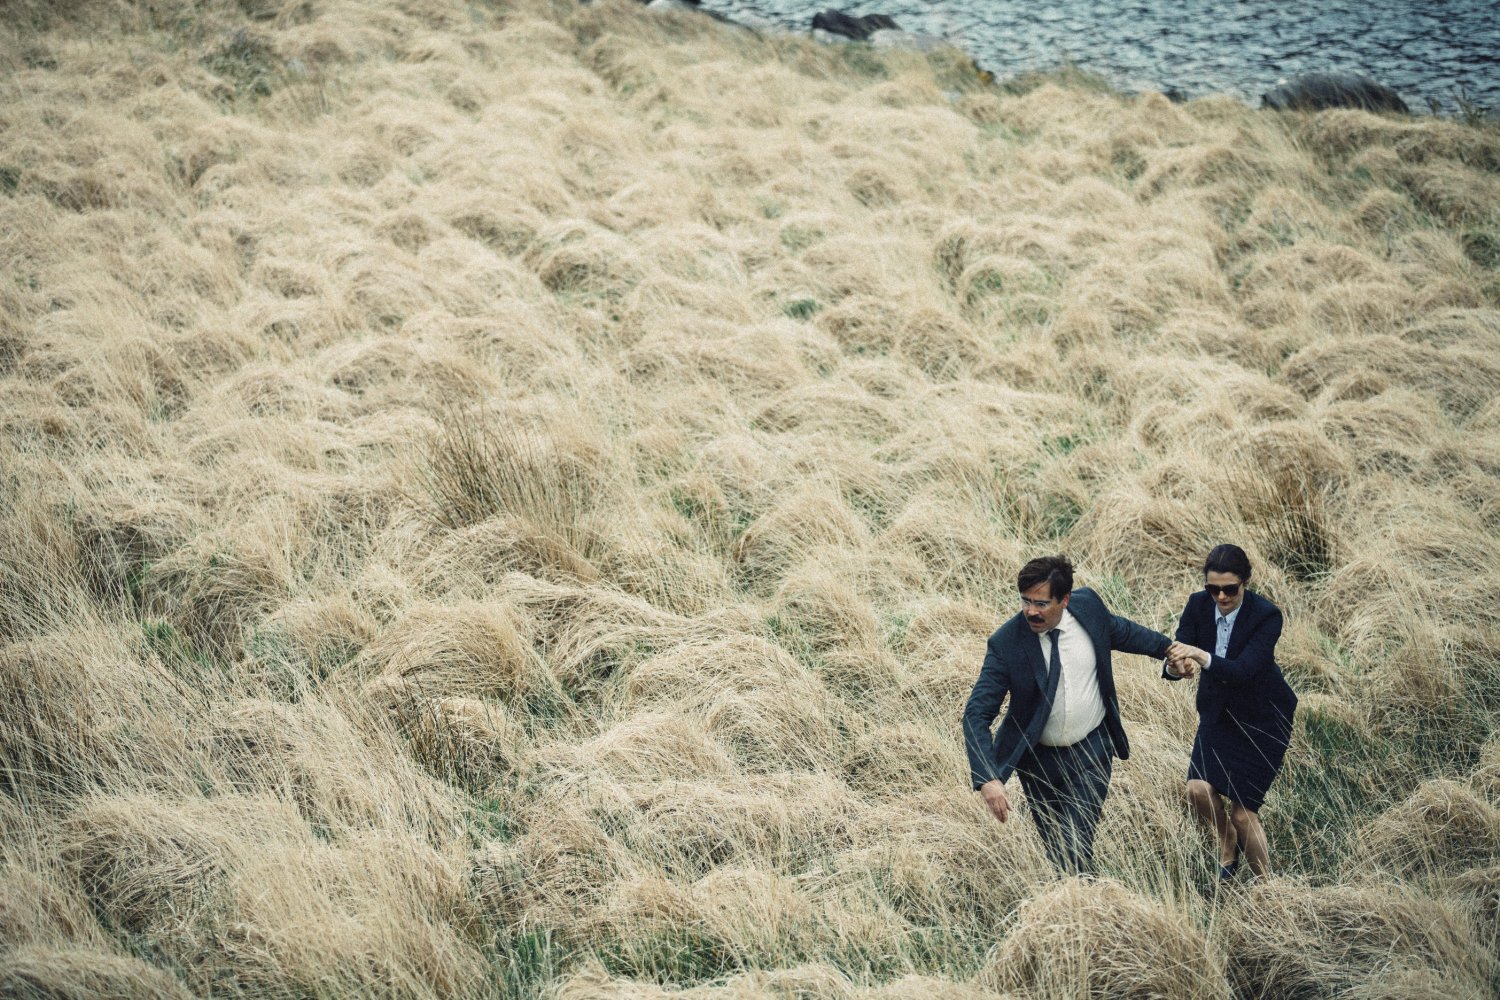 THE LOBSTER is Bizarrely Fascinating and Original